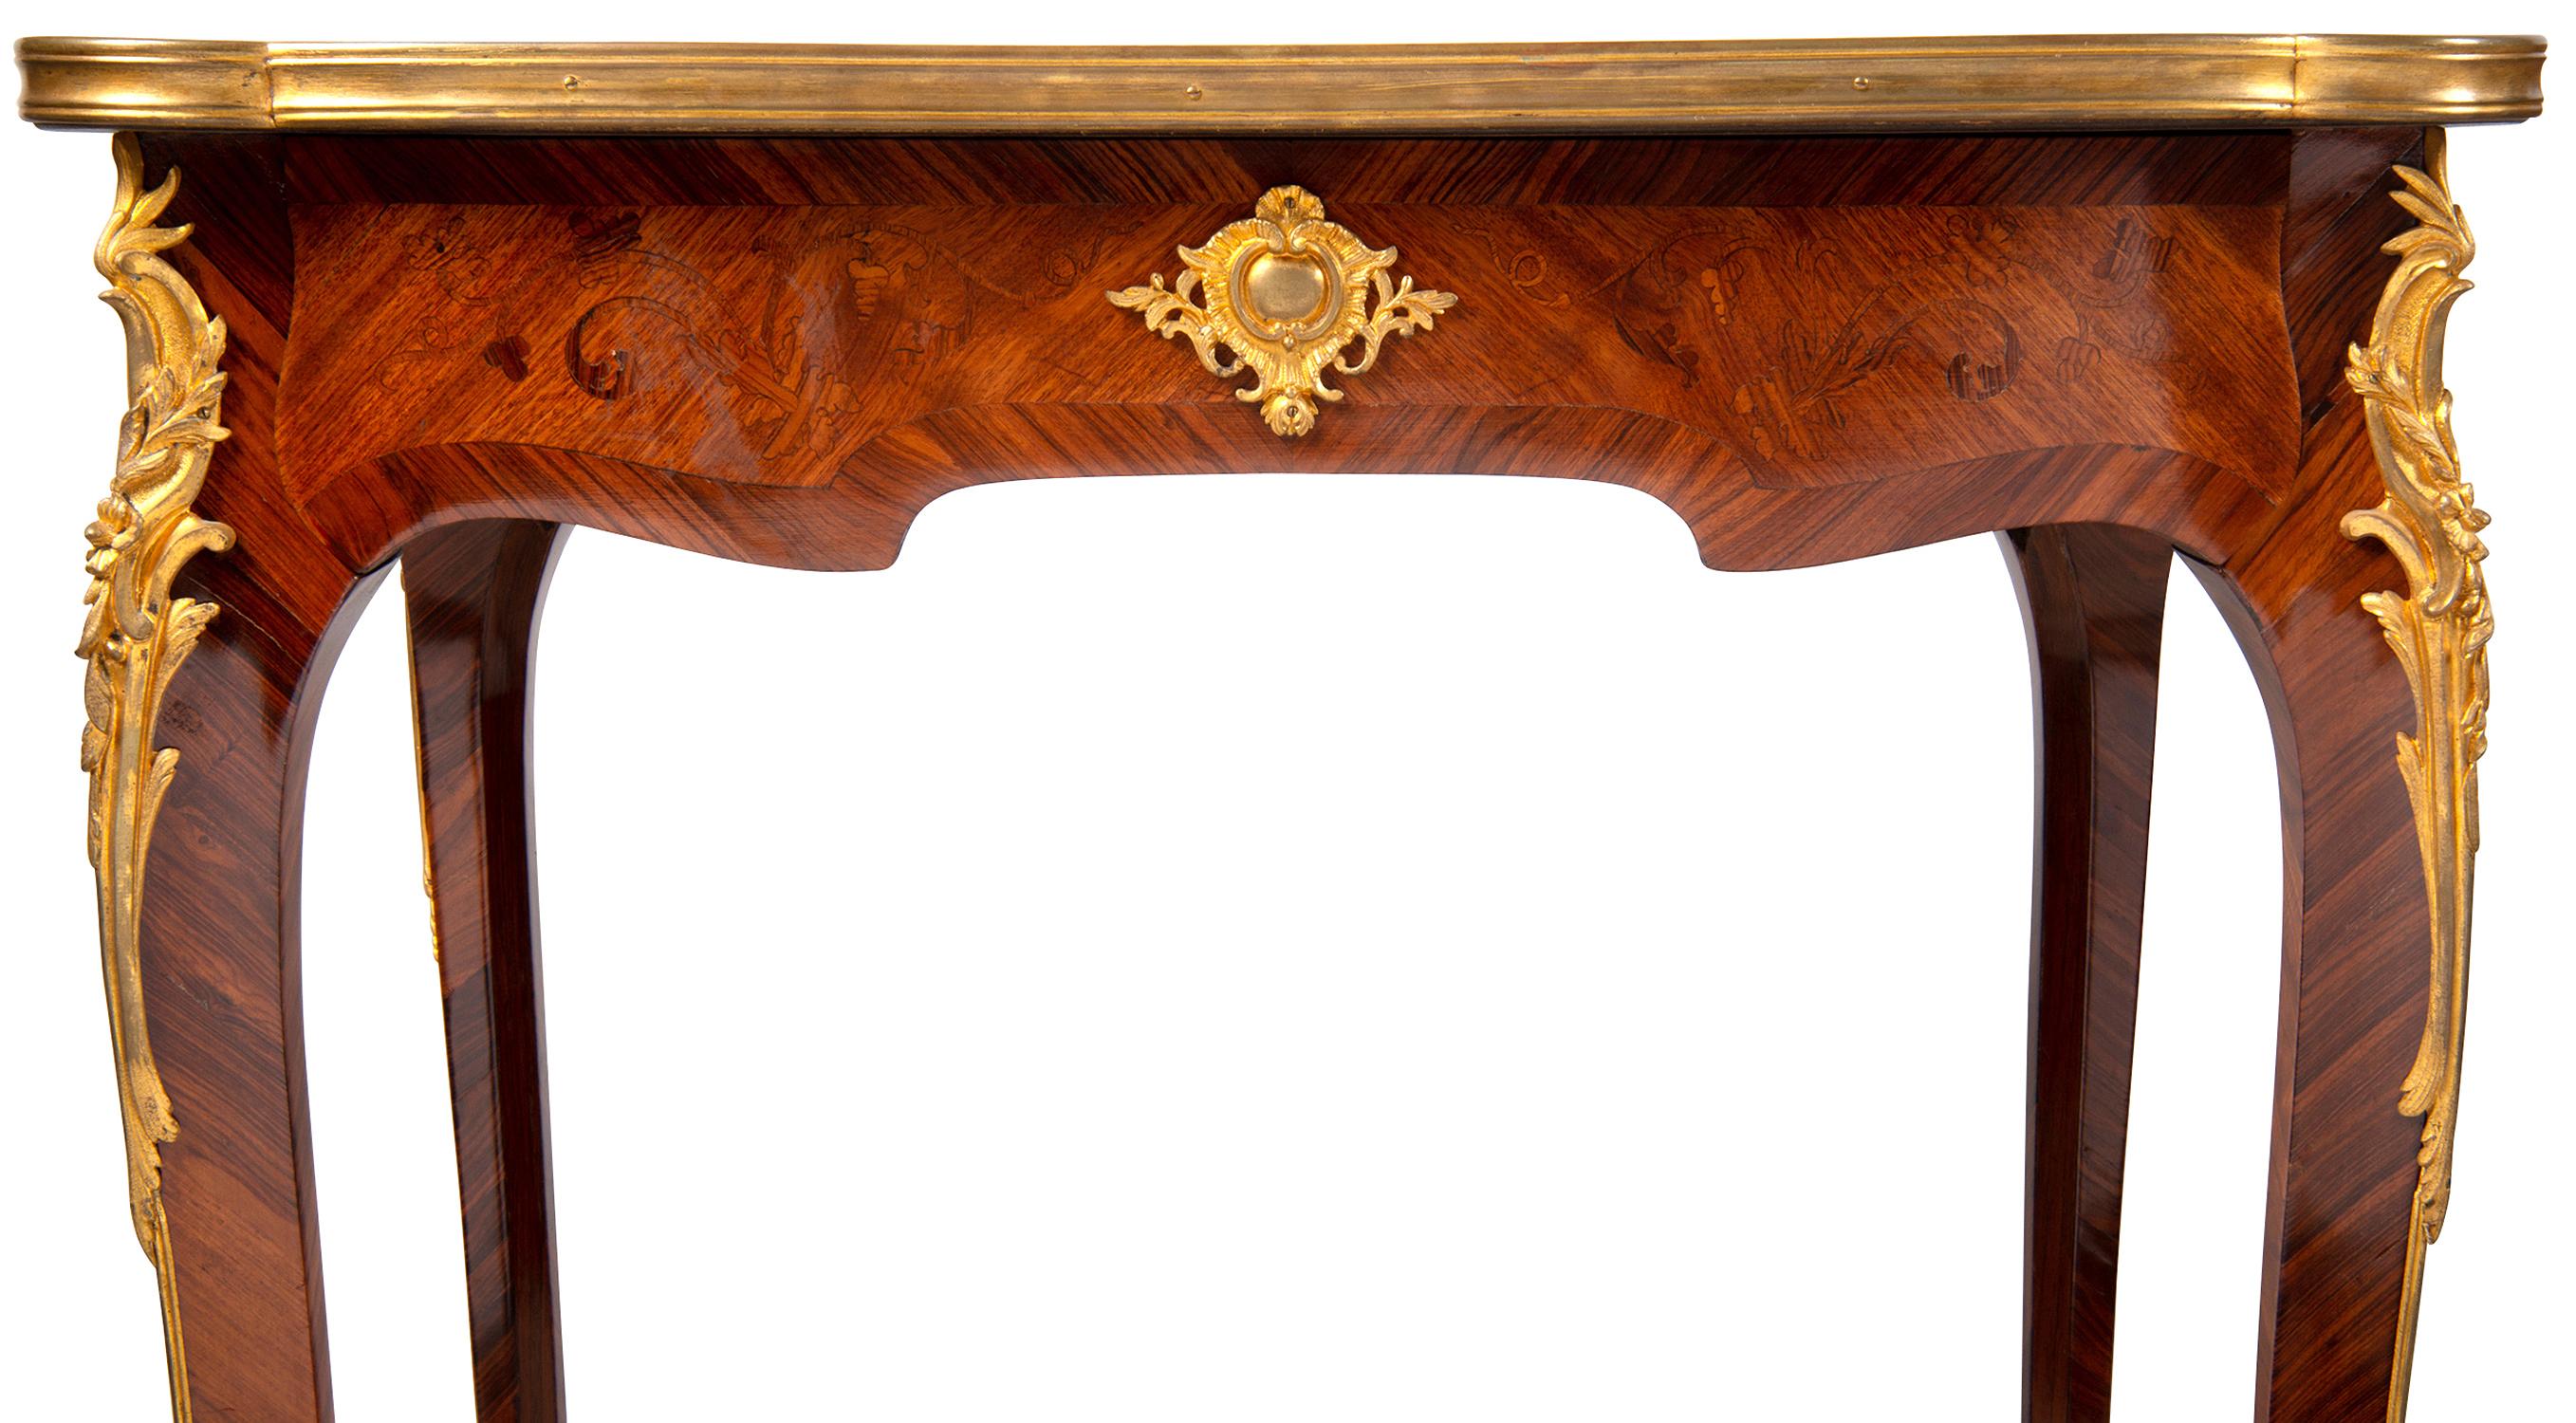 Marquetry Near Pair of Linke Influenced Louis XVI Style Side Tables, Late 19th Century